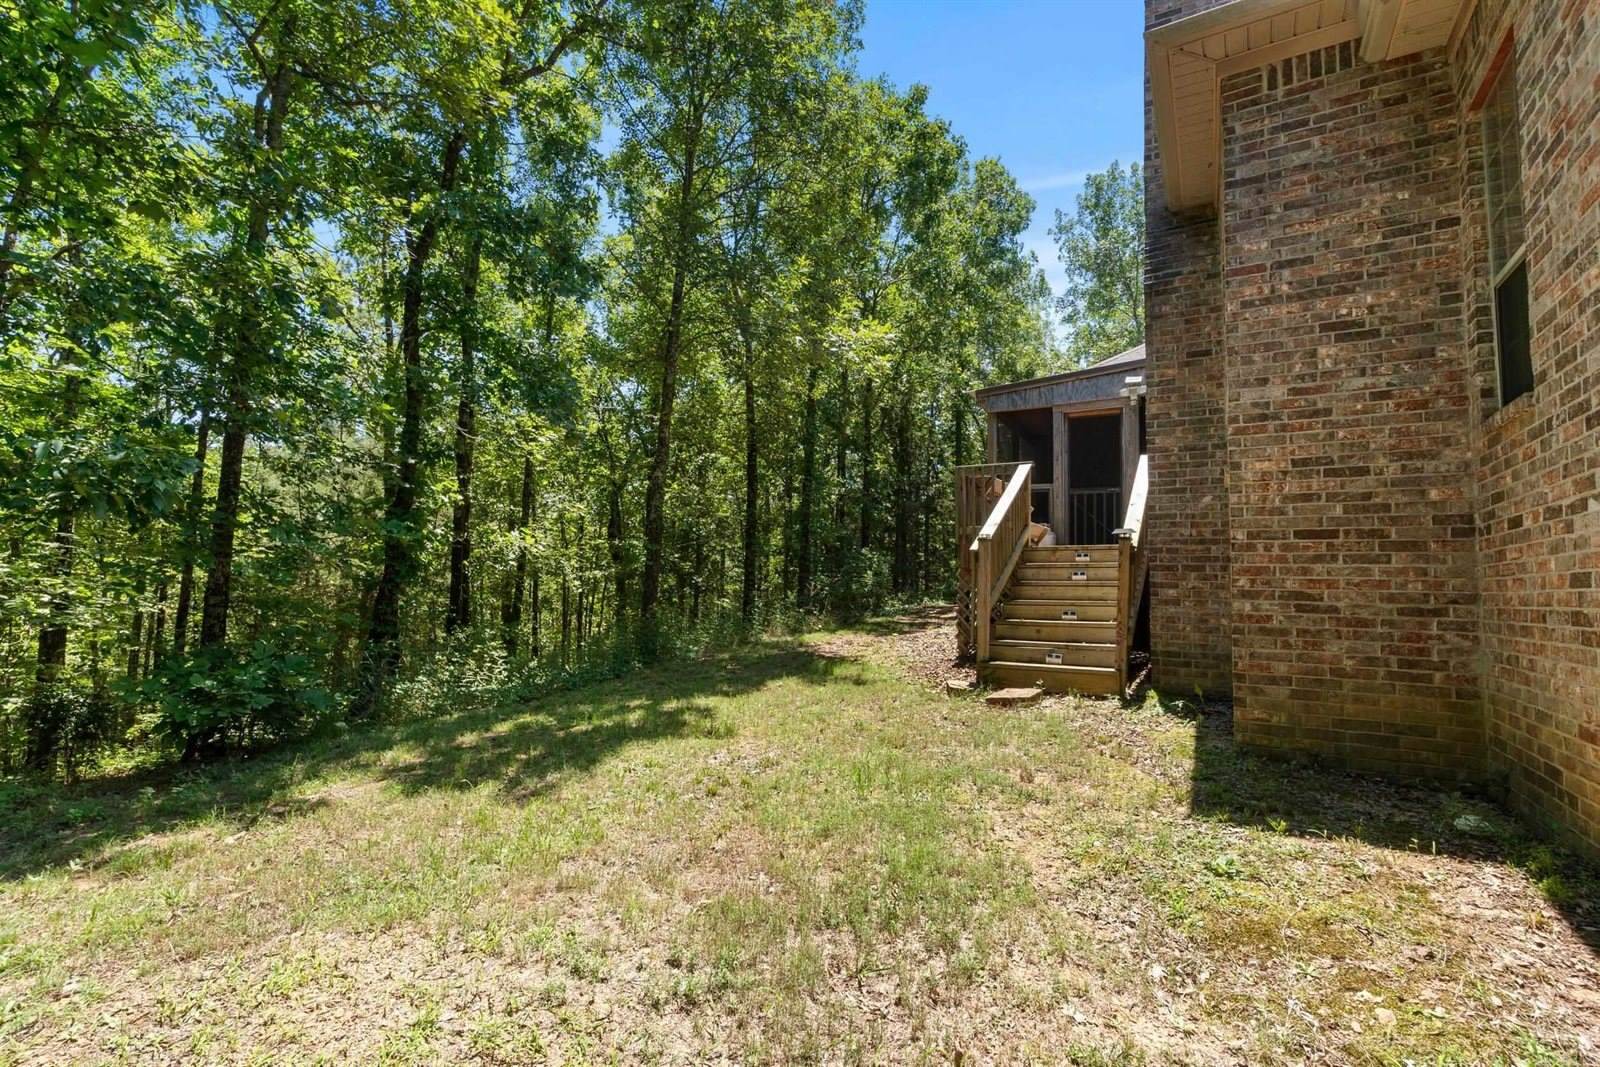 12 Mountain View Rd, Conway, AR 72034